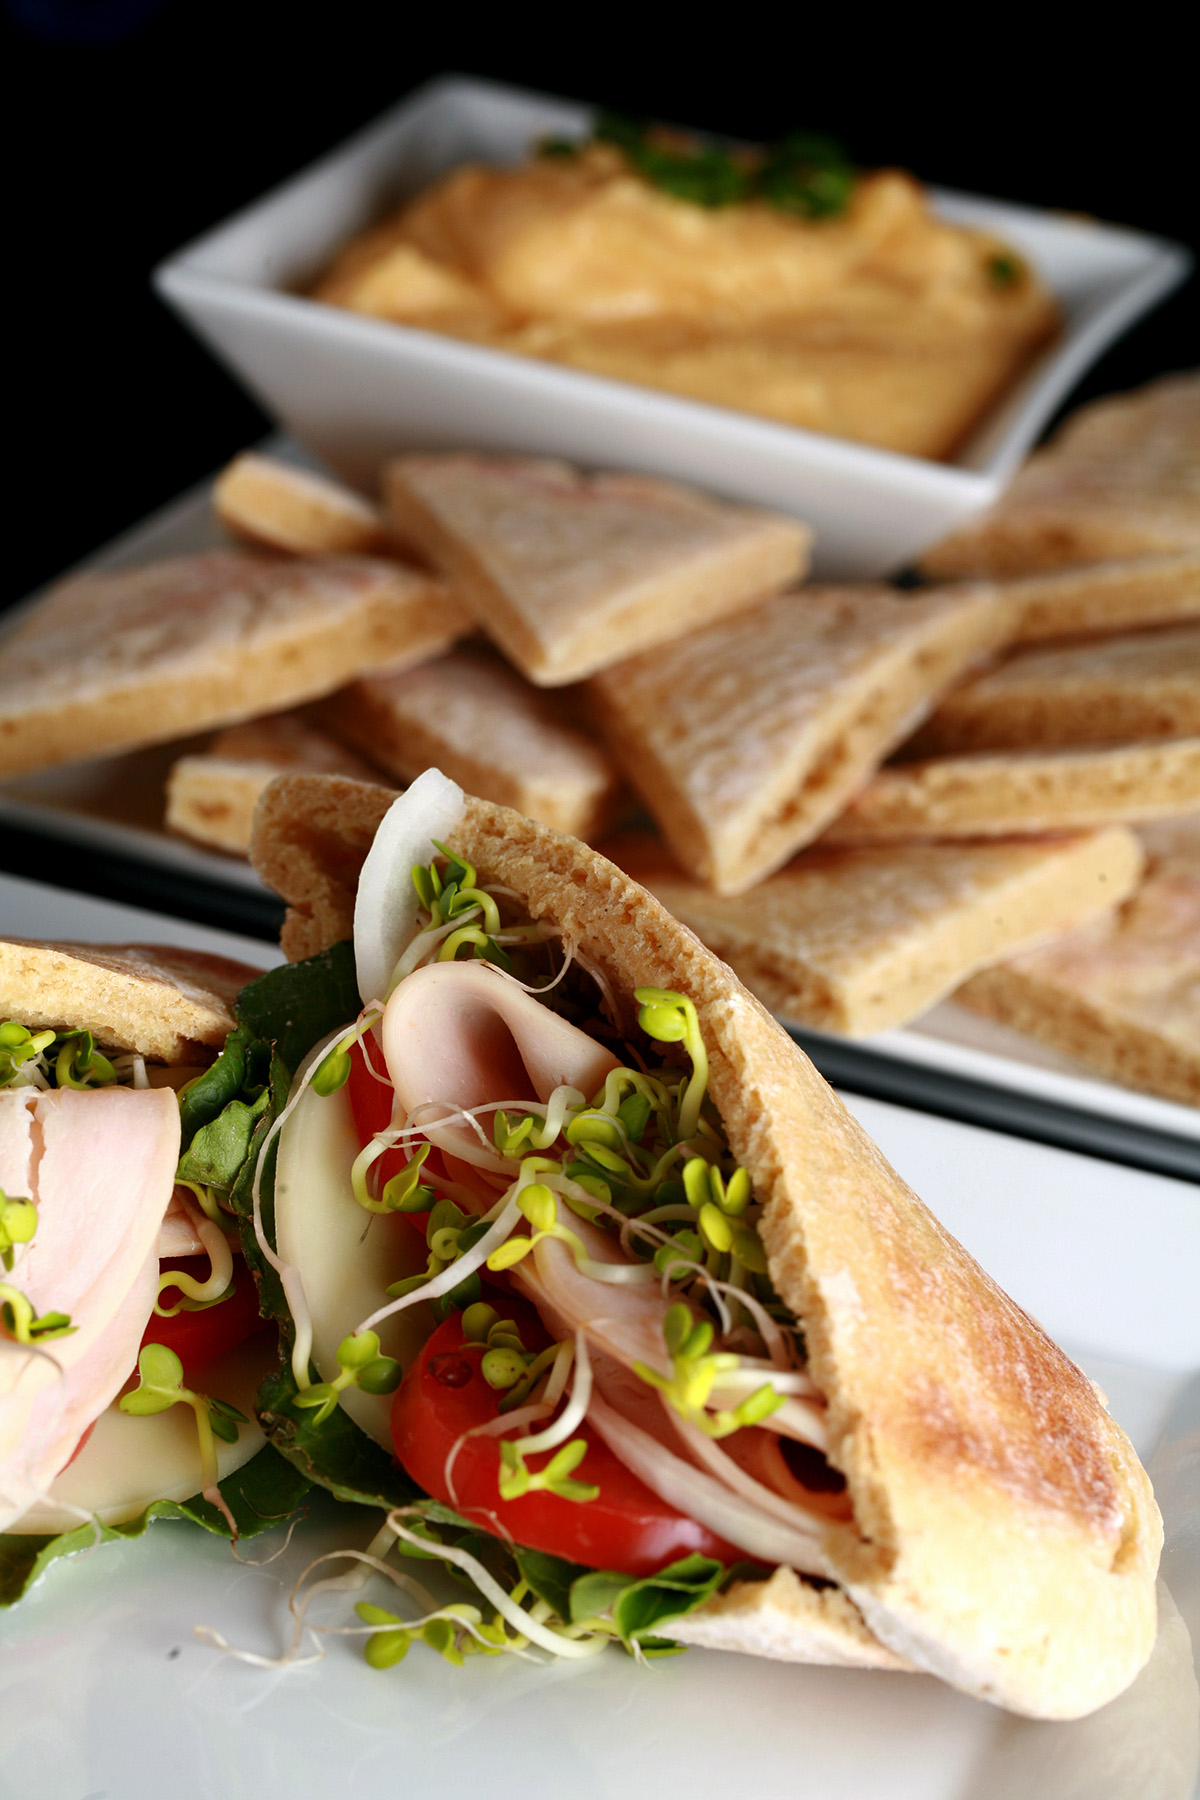 A sandwich made from a gluten free pita pocket, in front of a plate of gluten free pita bread wedges and hummus.